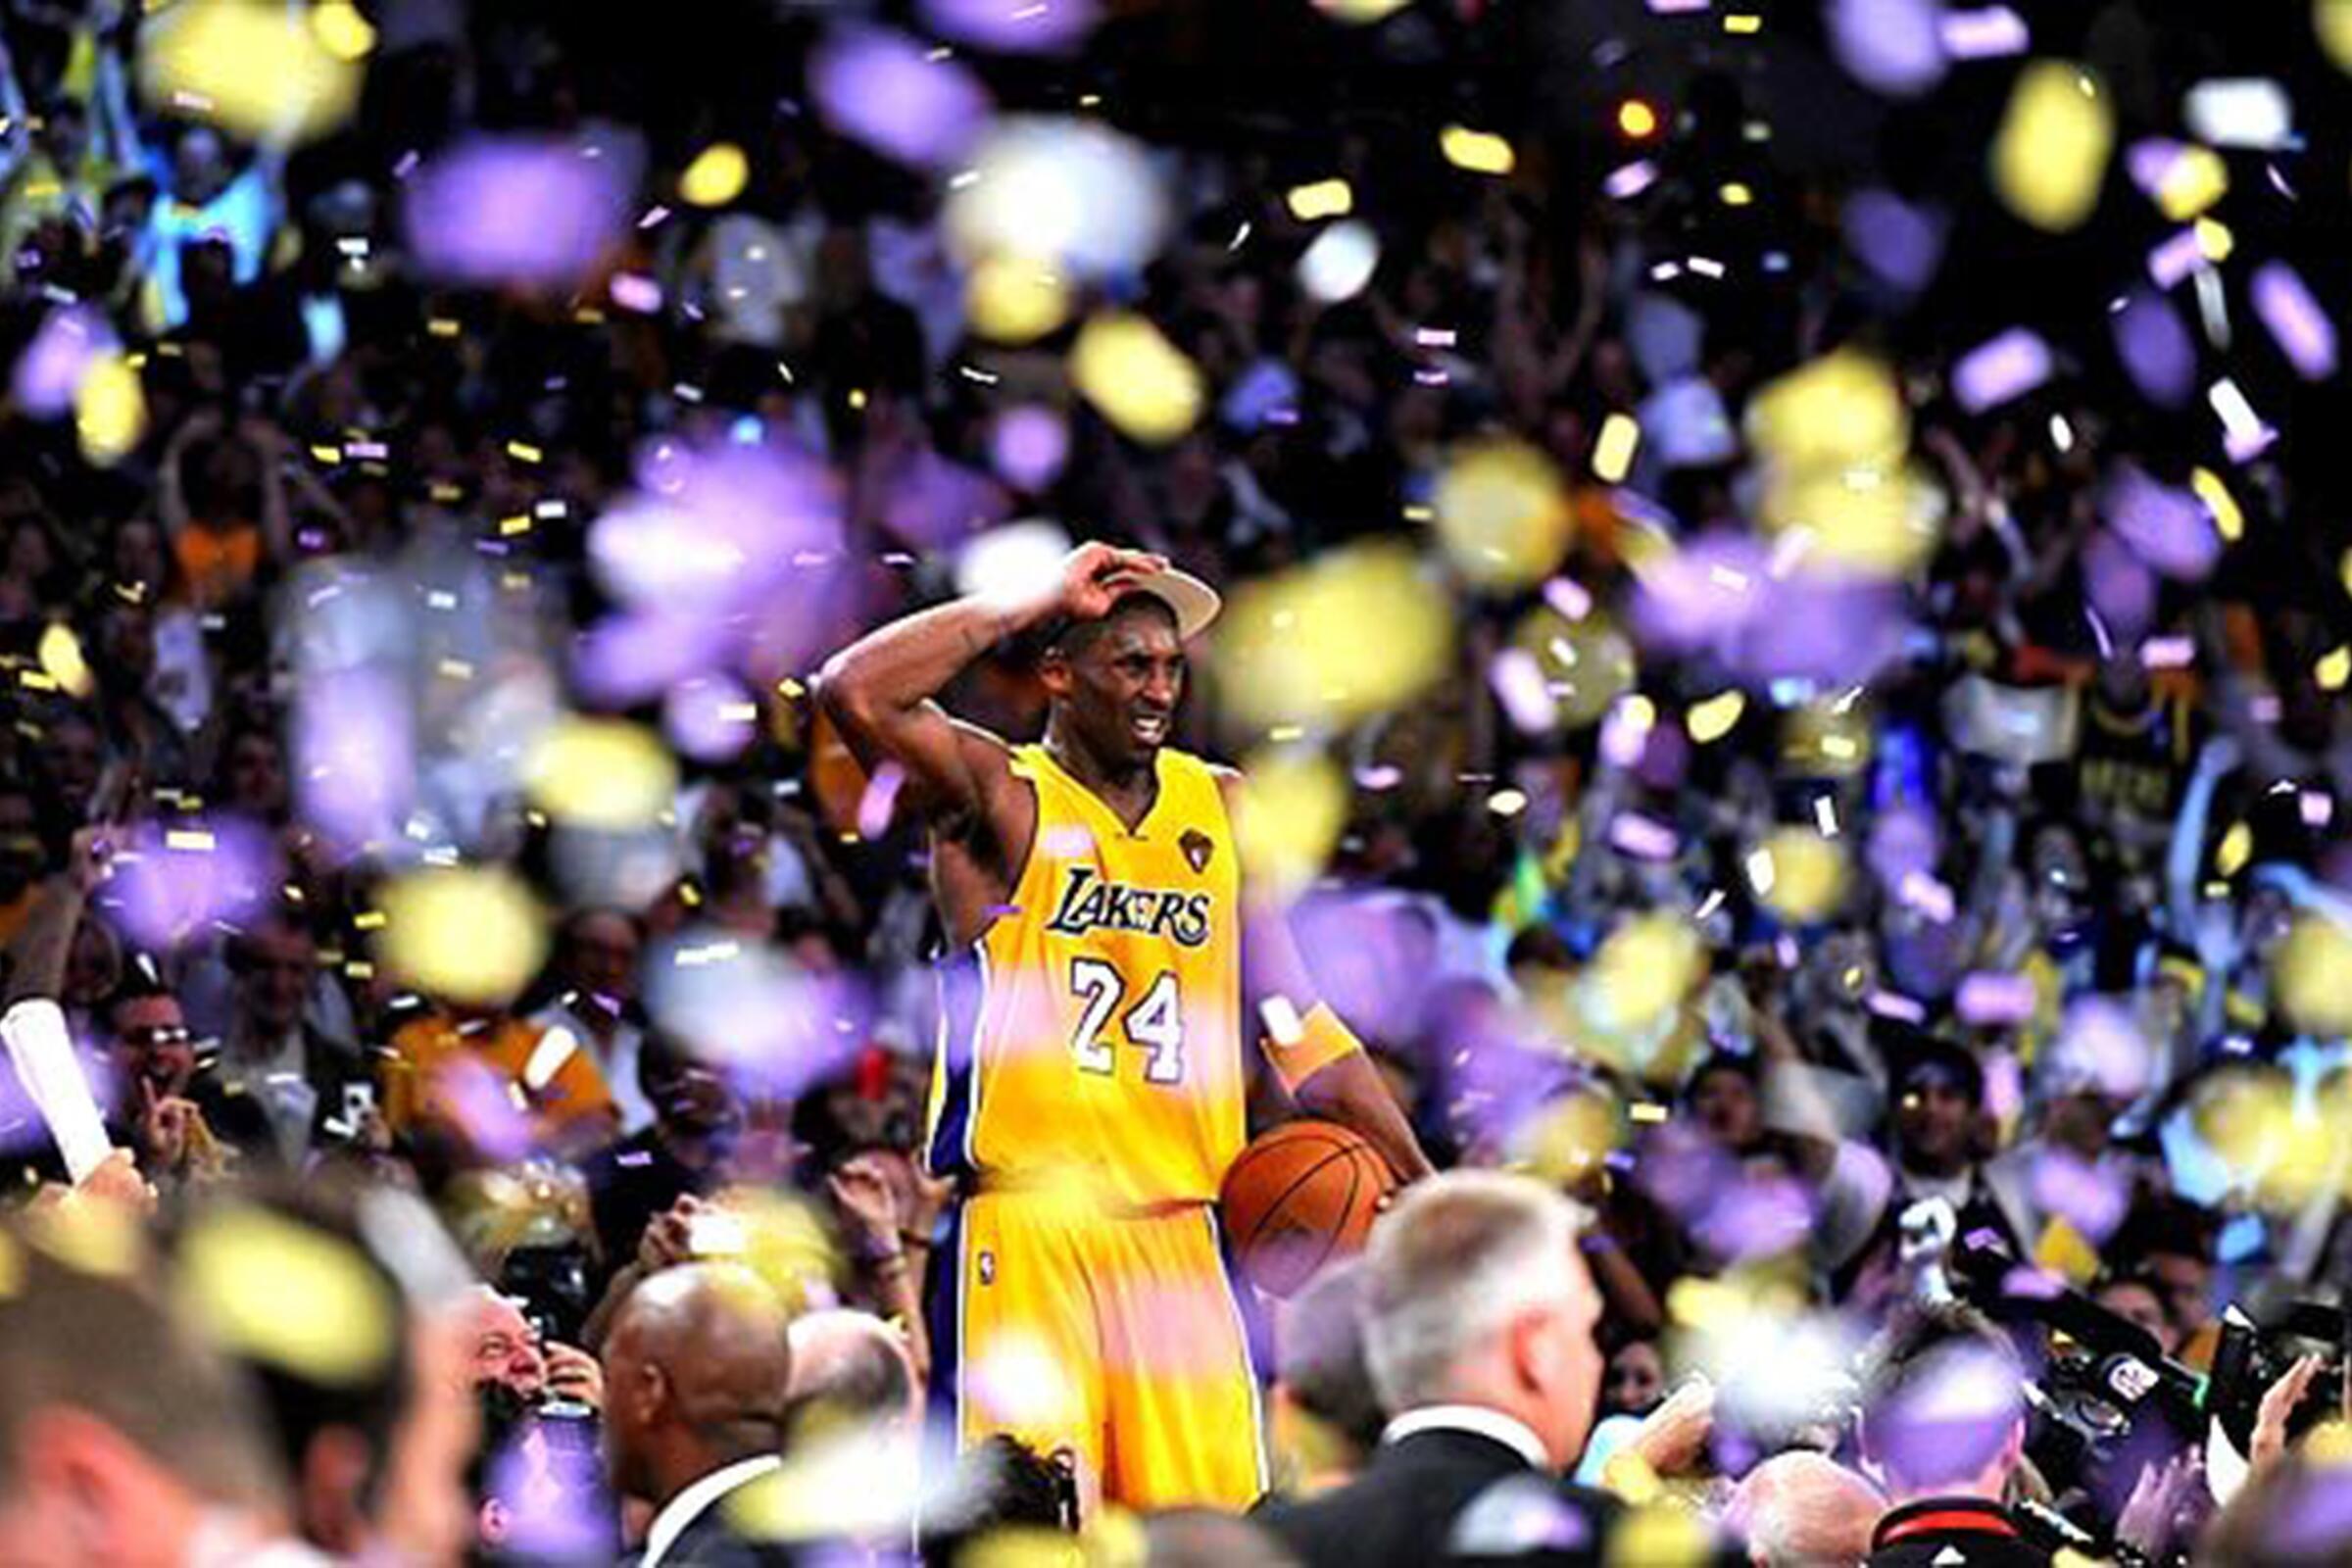 Kobe Bryant stands on the scorers' table at Staples Center after the Lakers defeated the Celtics to win the NBA championship.